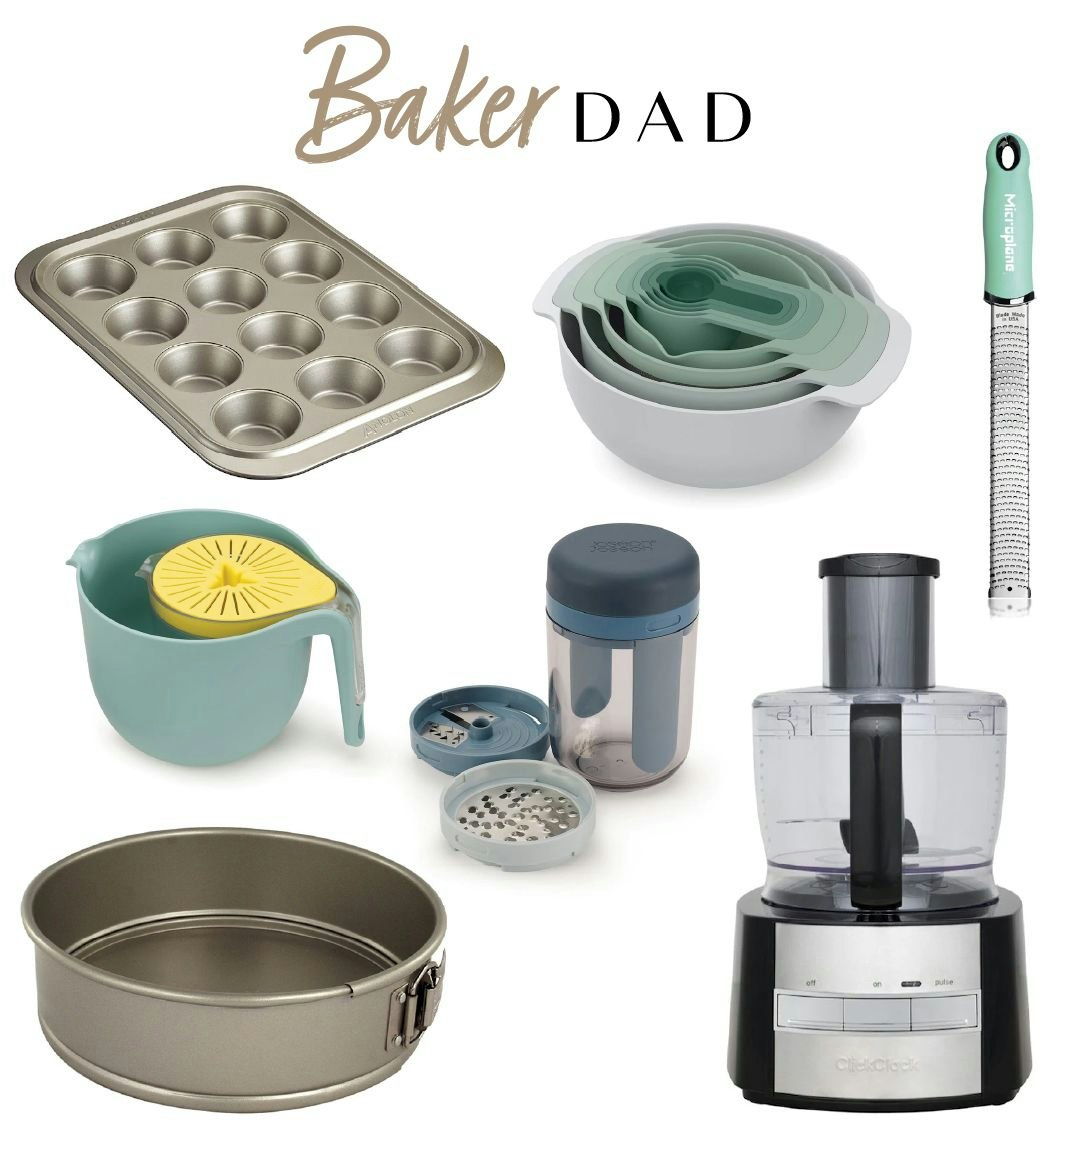 Product images picked for a Baker Dad